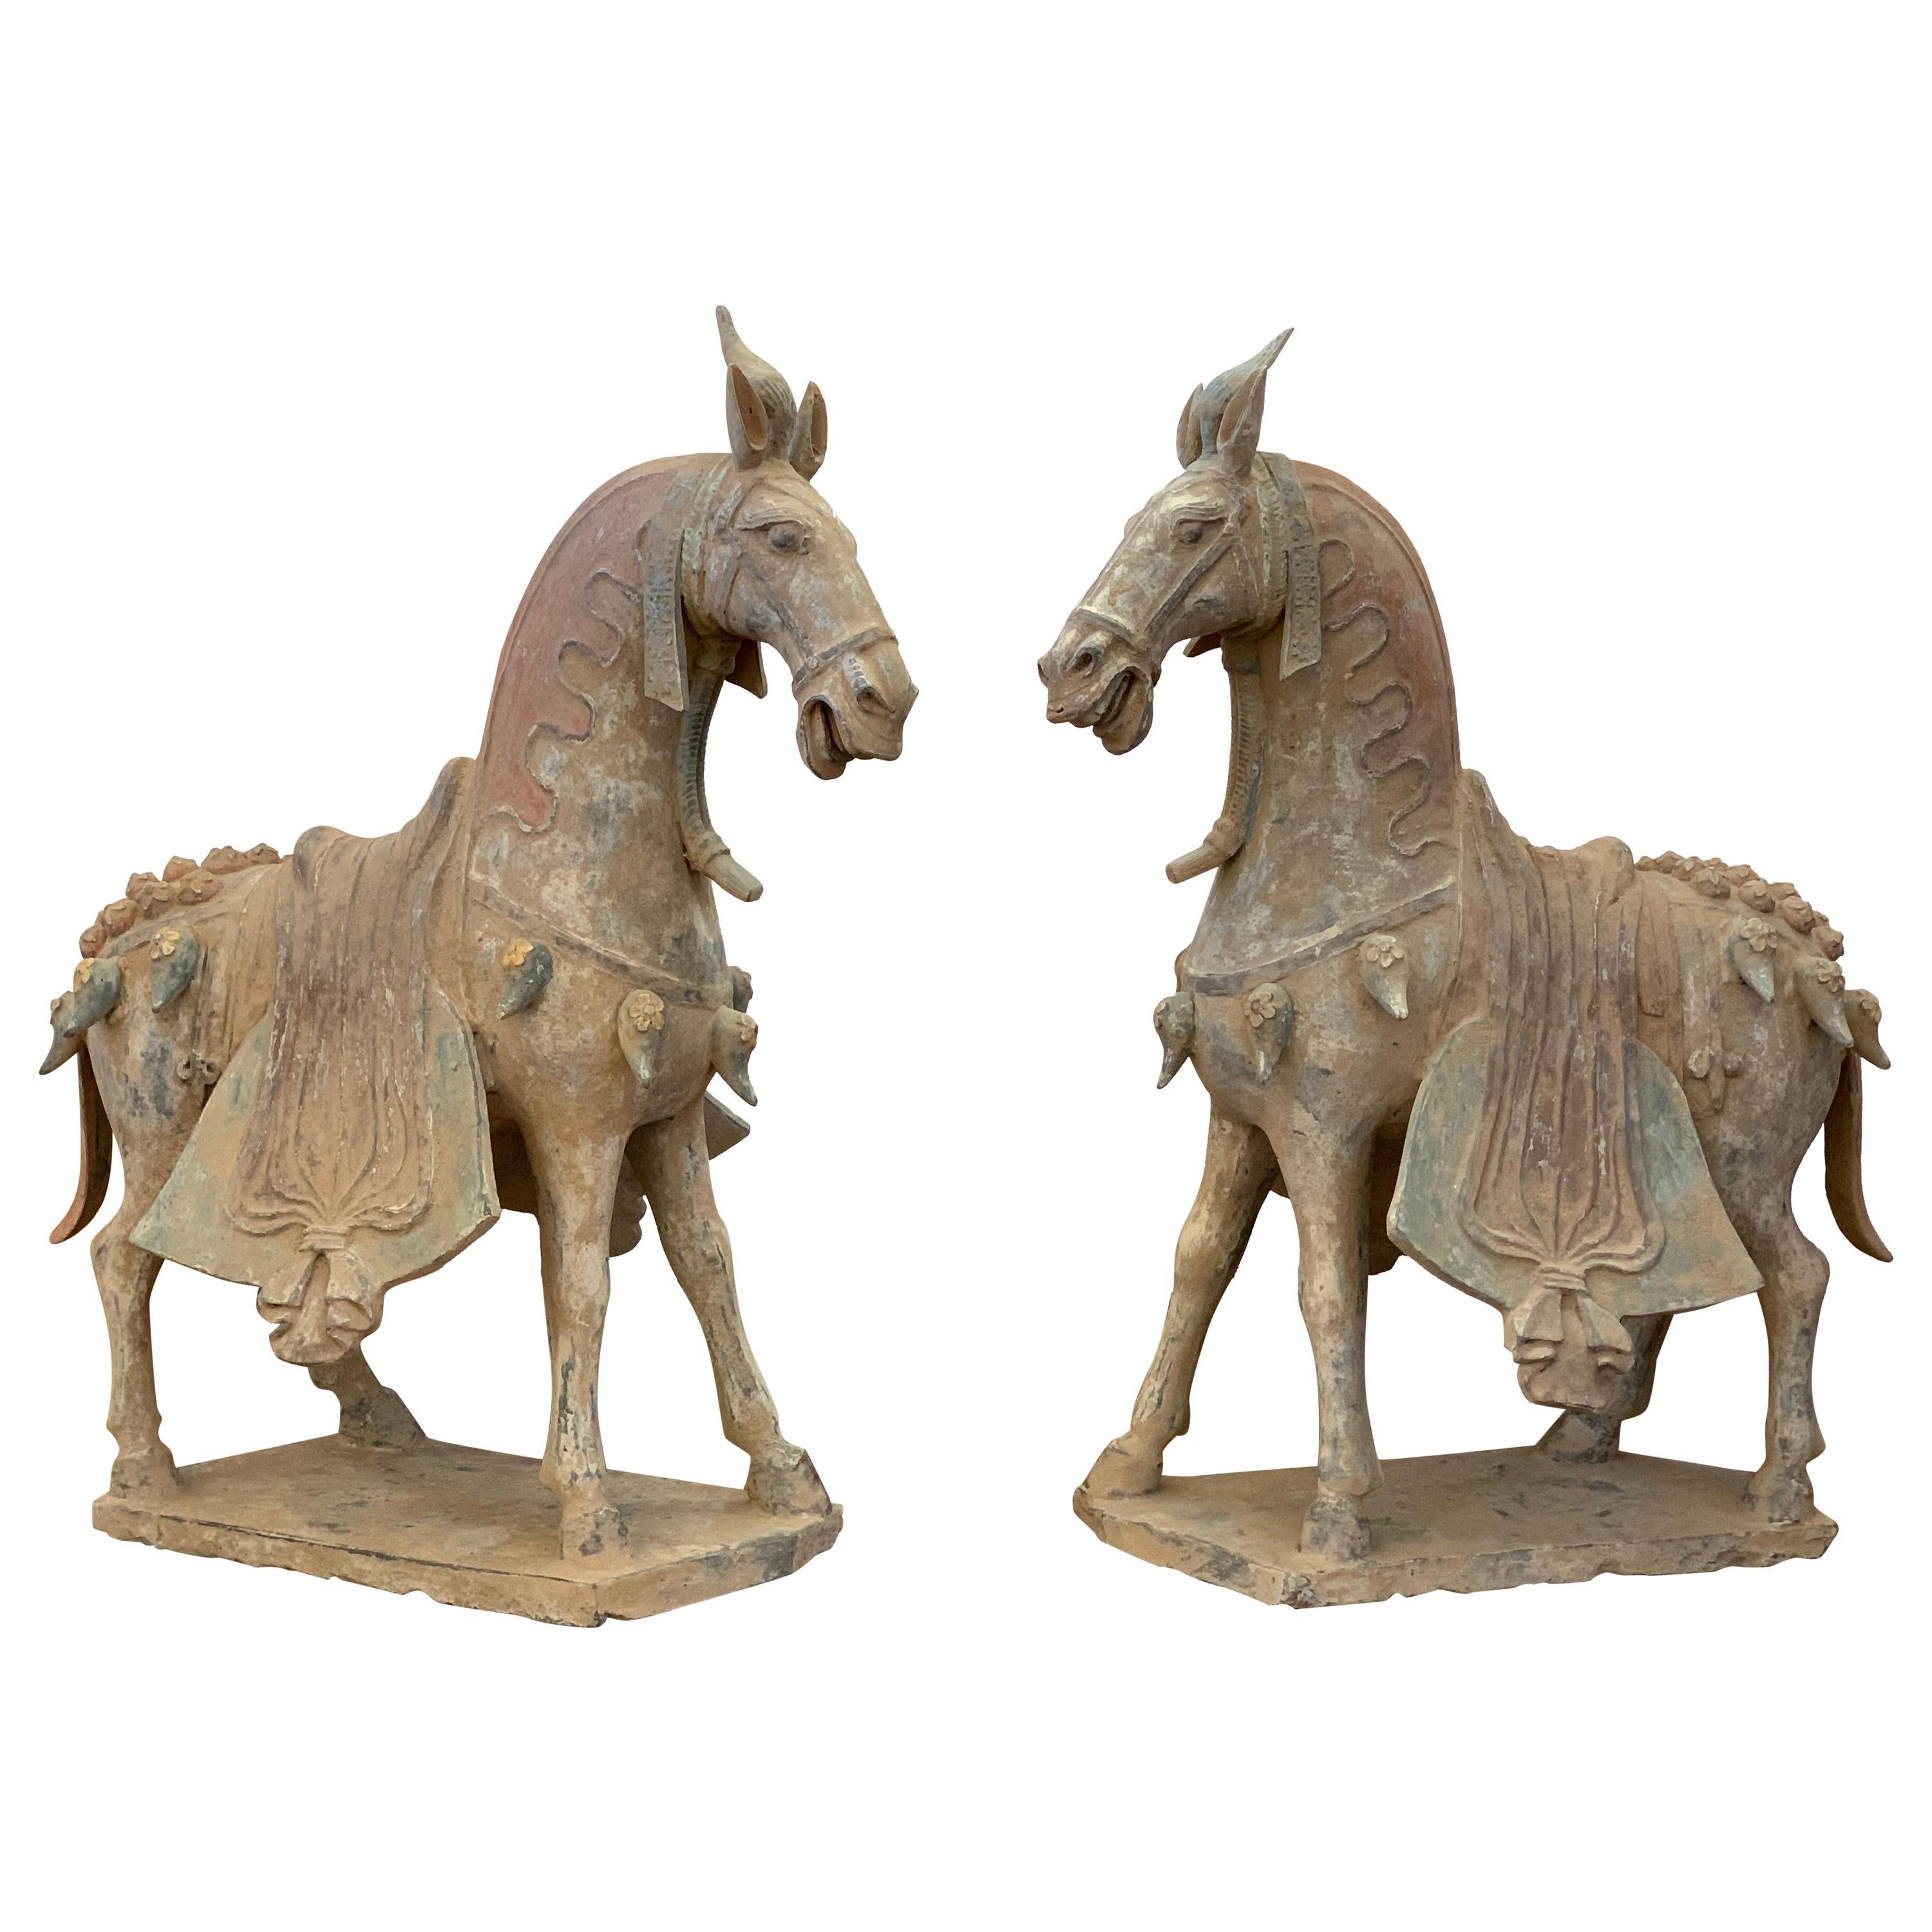  Northern Wei Dynasty Terracotta Horses, TL Tested,  '386 AD-535 AD'